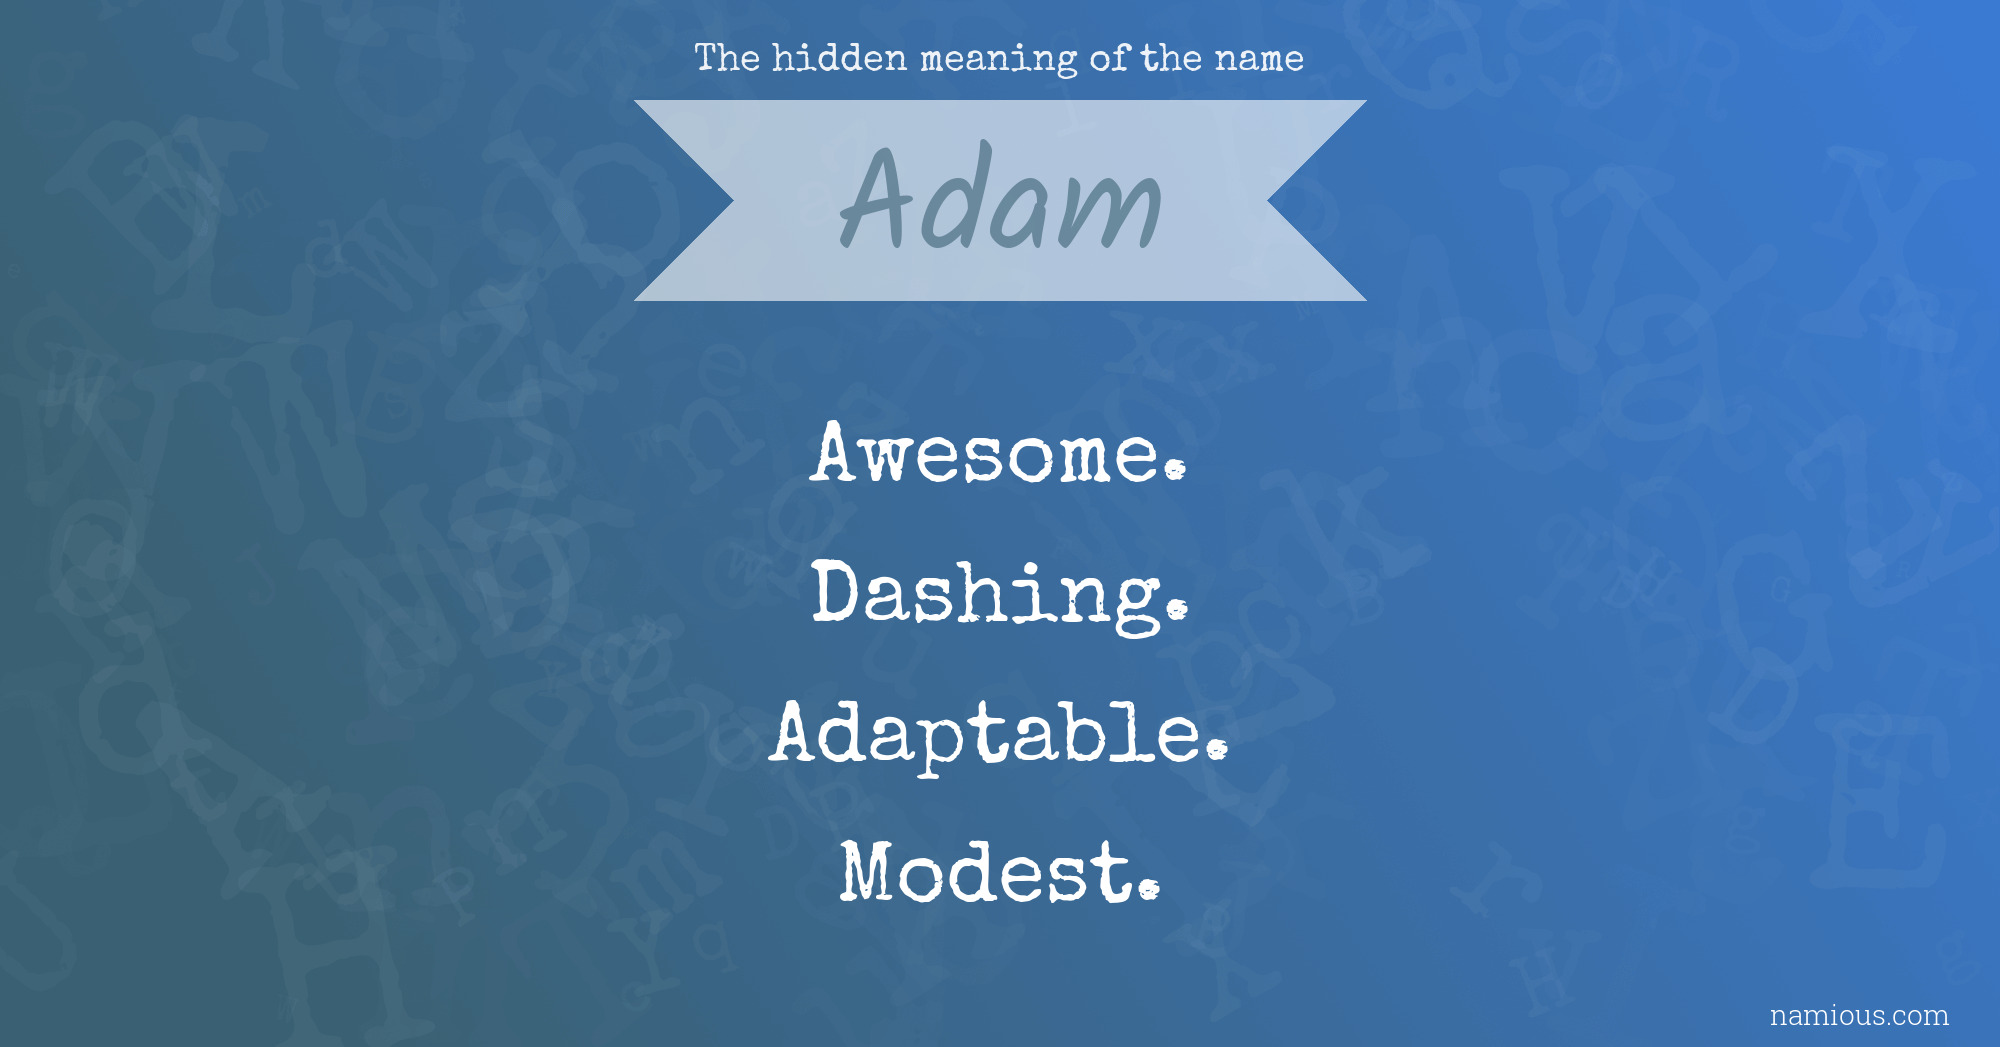 The hidden meaning of the name Adam